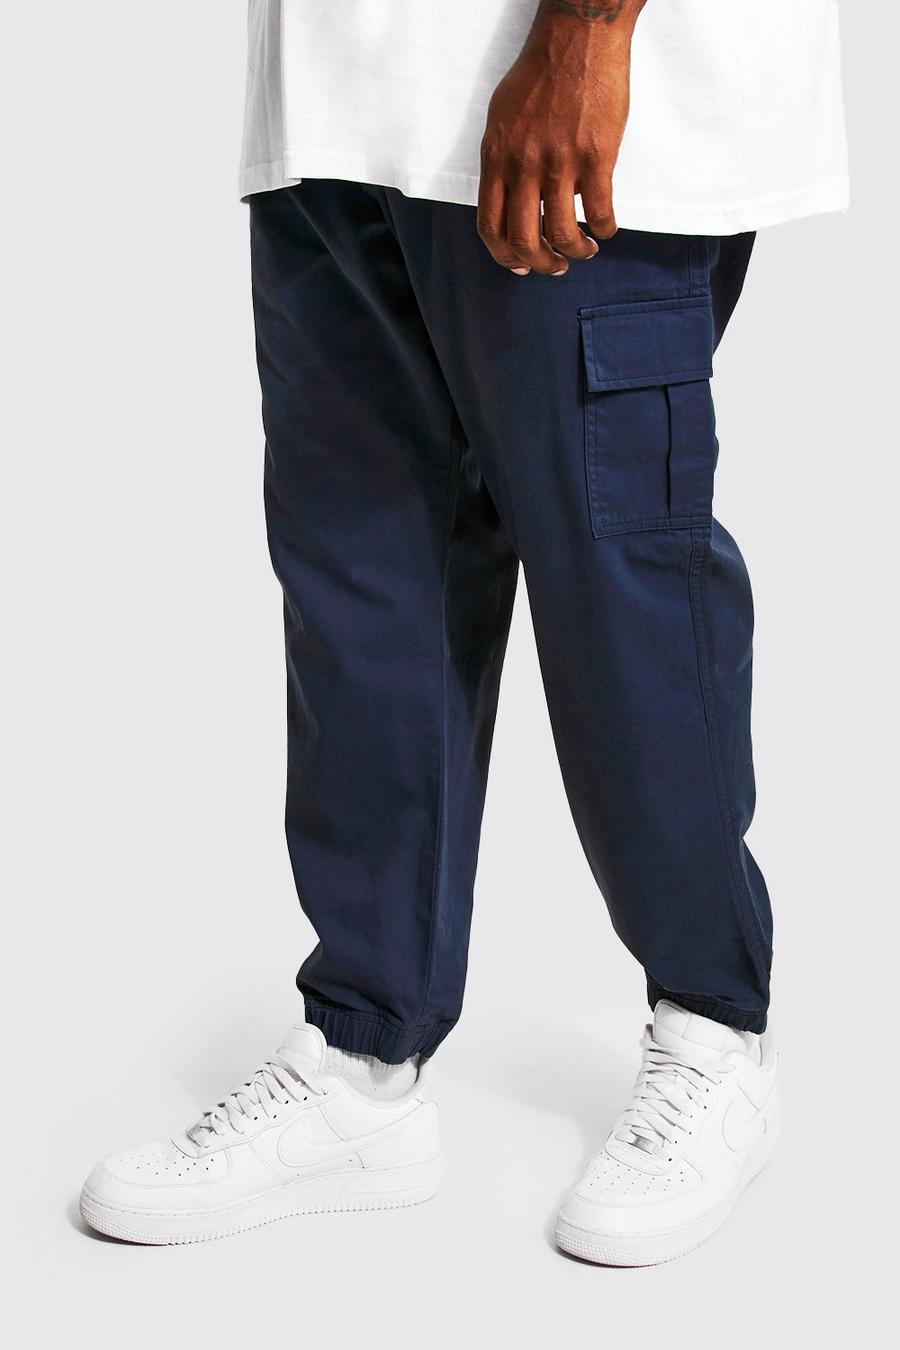 Grande taille - Pantalon cargo coupe droite, Navy marine image number 1